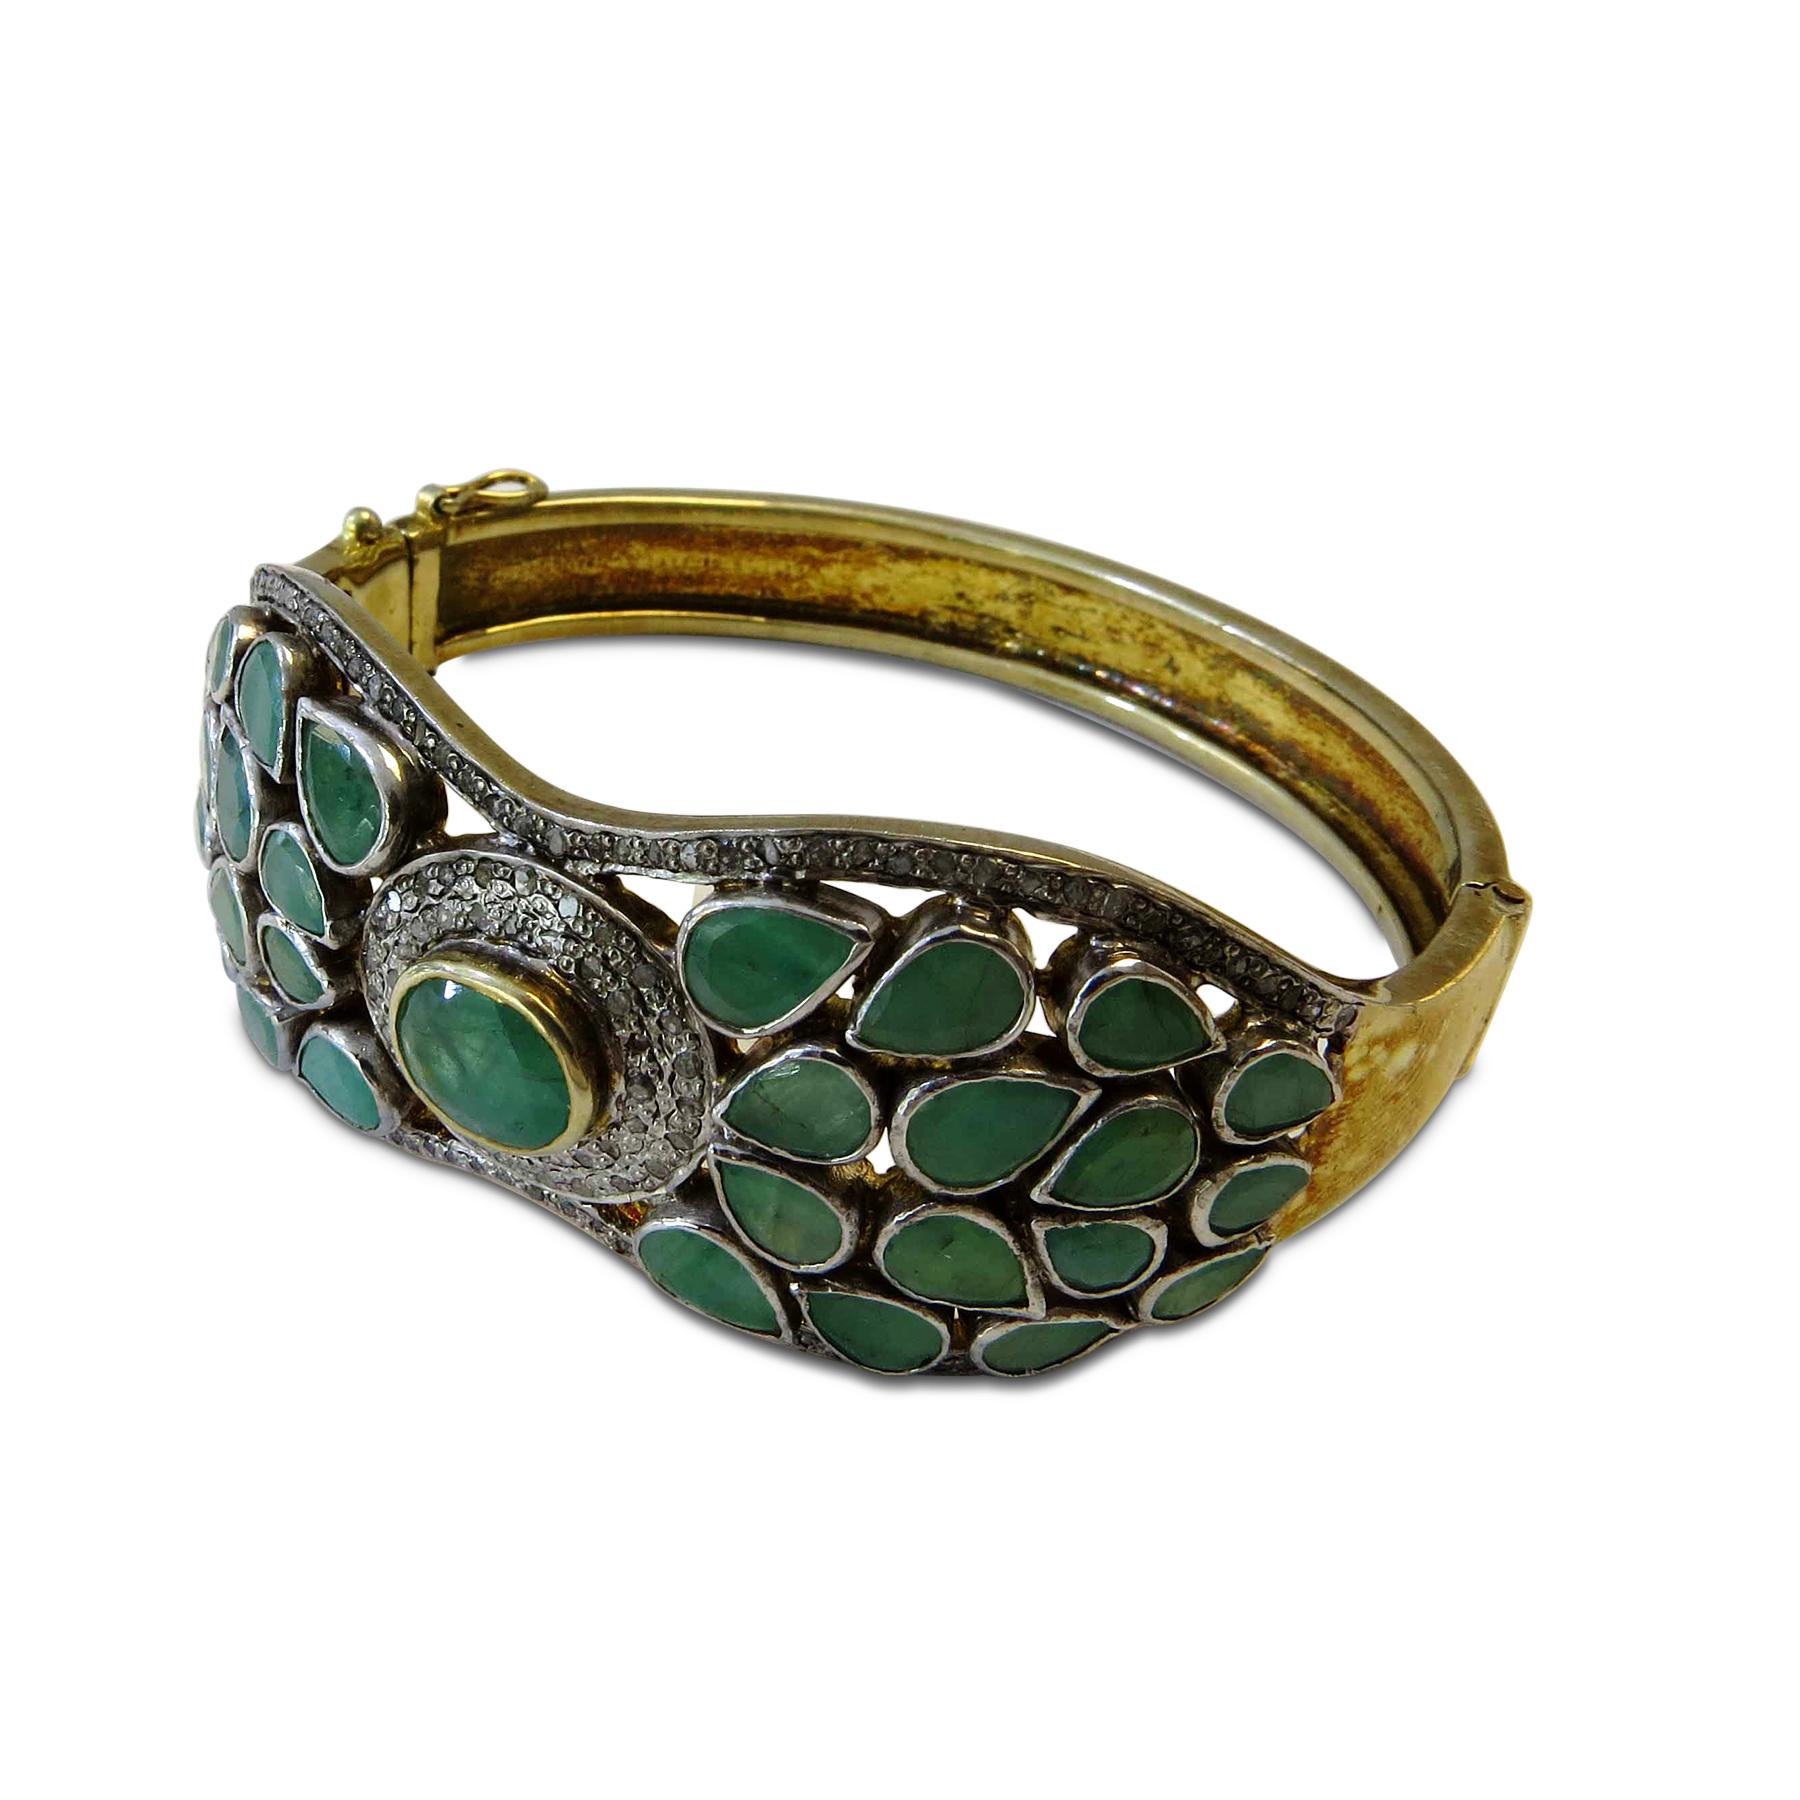 Emerald, Diamond Bangle Bracelet 18 Karat Gold on Silver In New Condition For Sale In Jackson Heights, NY